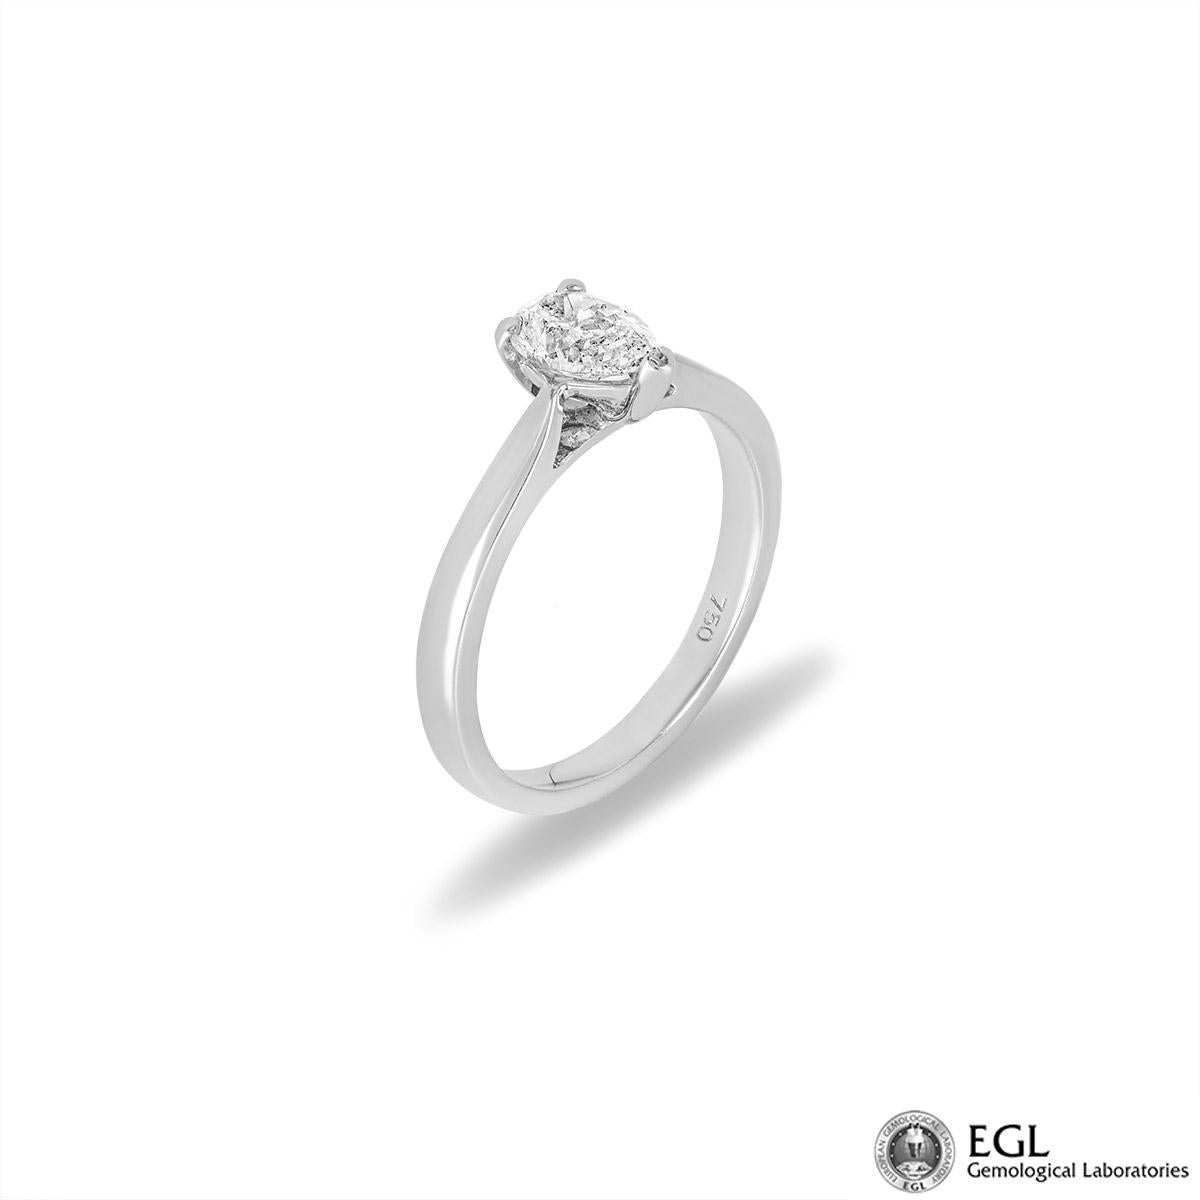 A beautiful white gold diamond engagement ring. The solitaire ring is set to the centre with a pear shaped diamond in a three prong mount weighing 0.75ct, H colour and SI2 clarity. The ring is currently a size UK N - EU 53 but can be adjusted for a